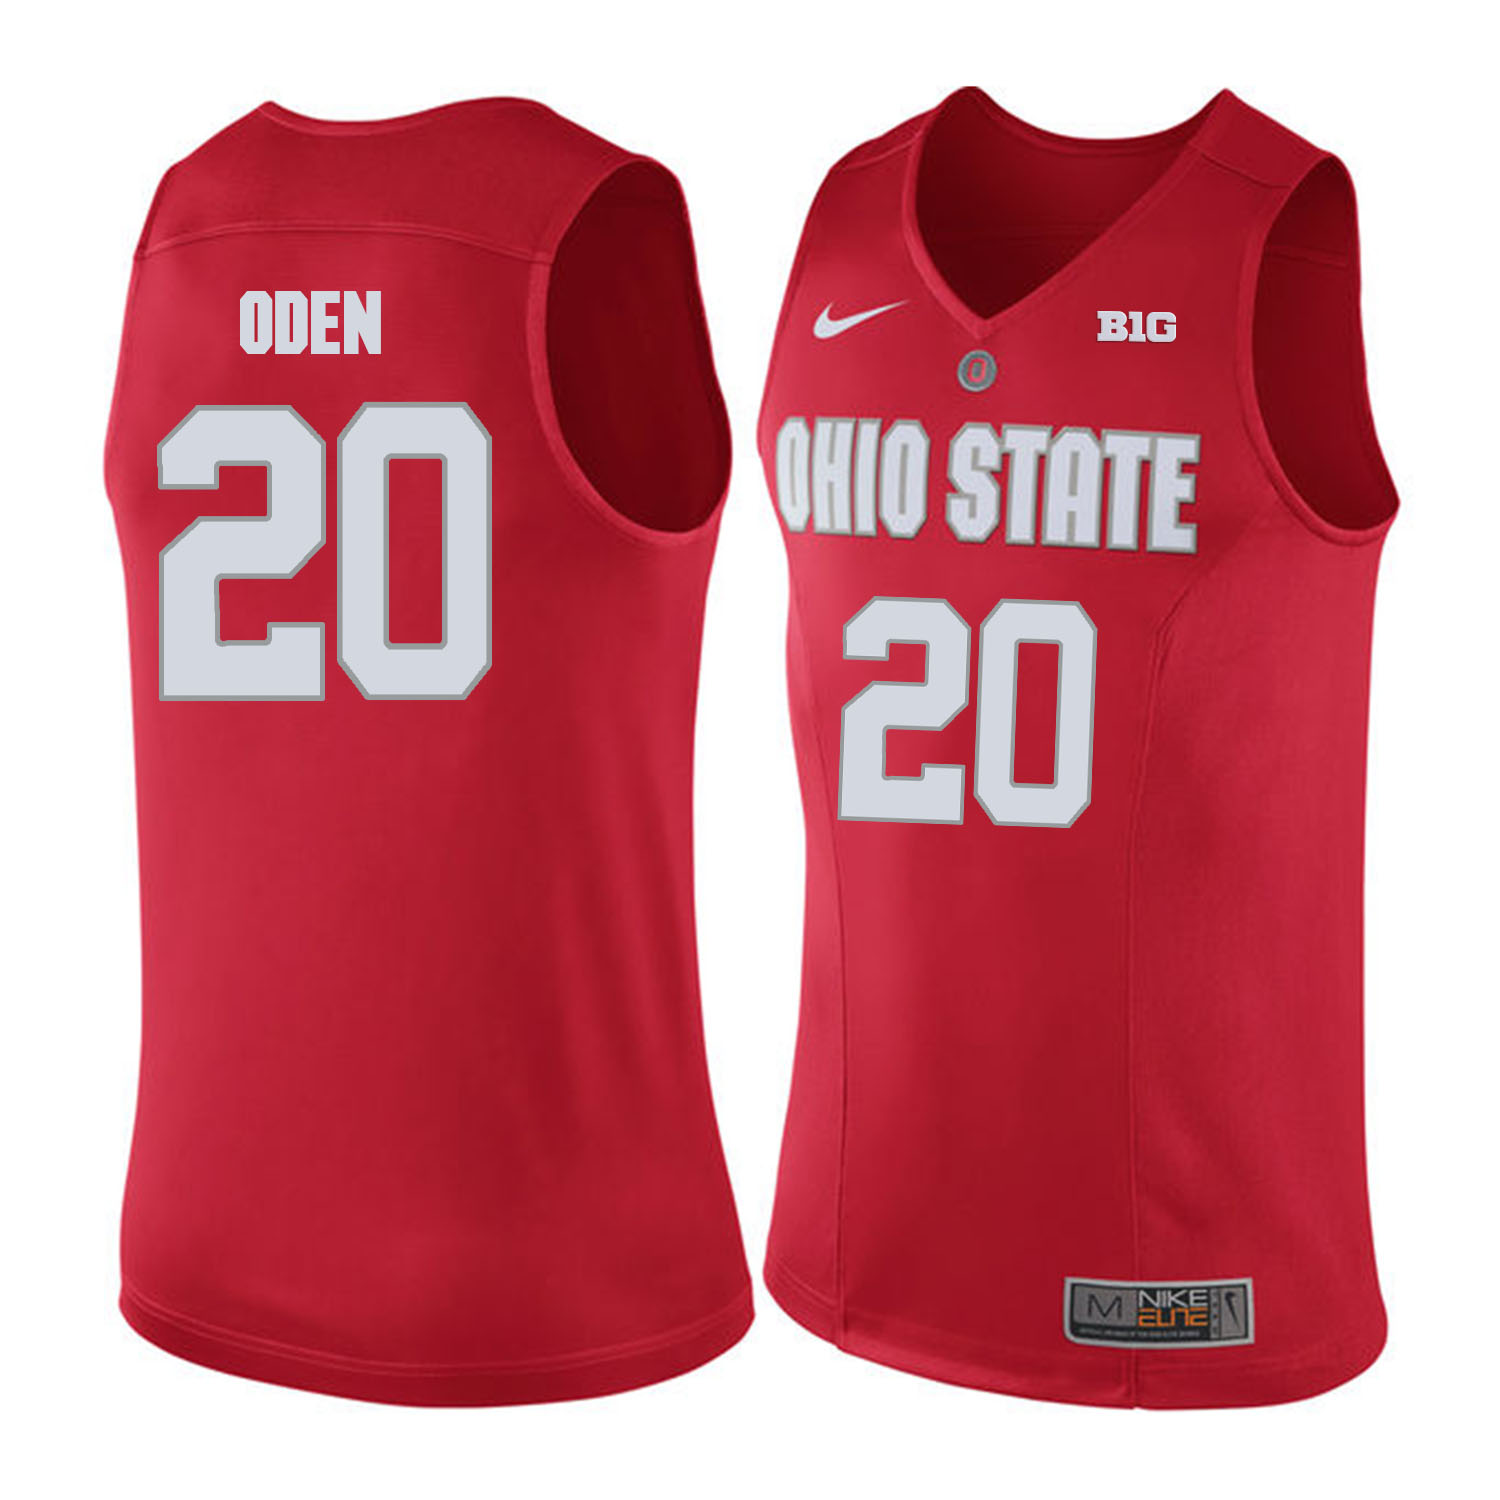 Ohio State Buckeyes 20 Greg Oden Red College Basketball Jersey